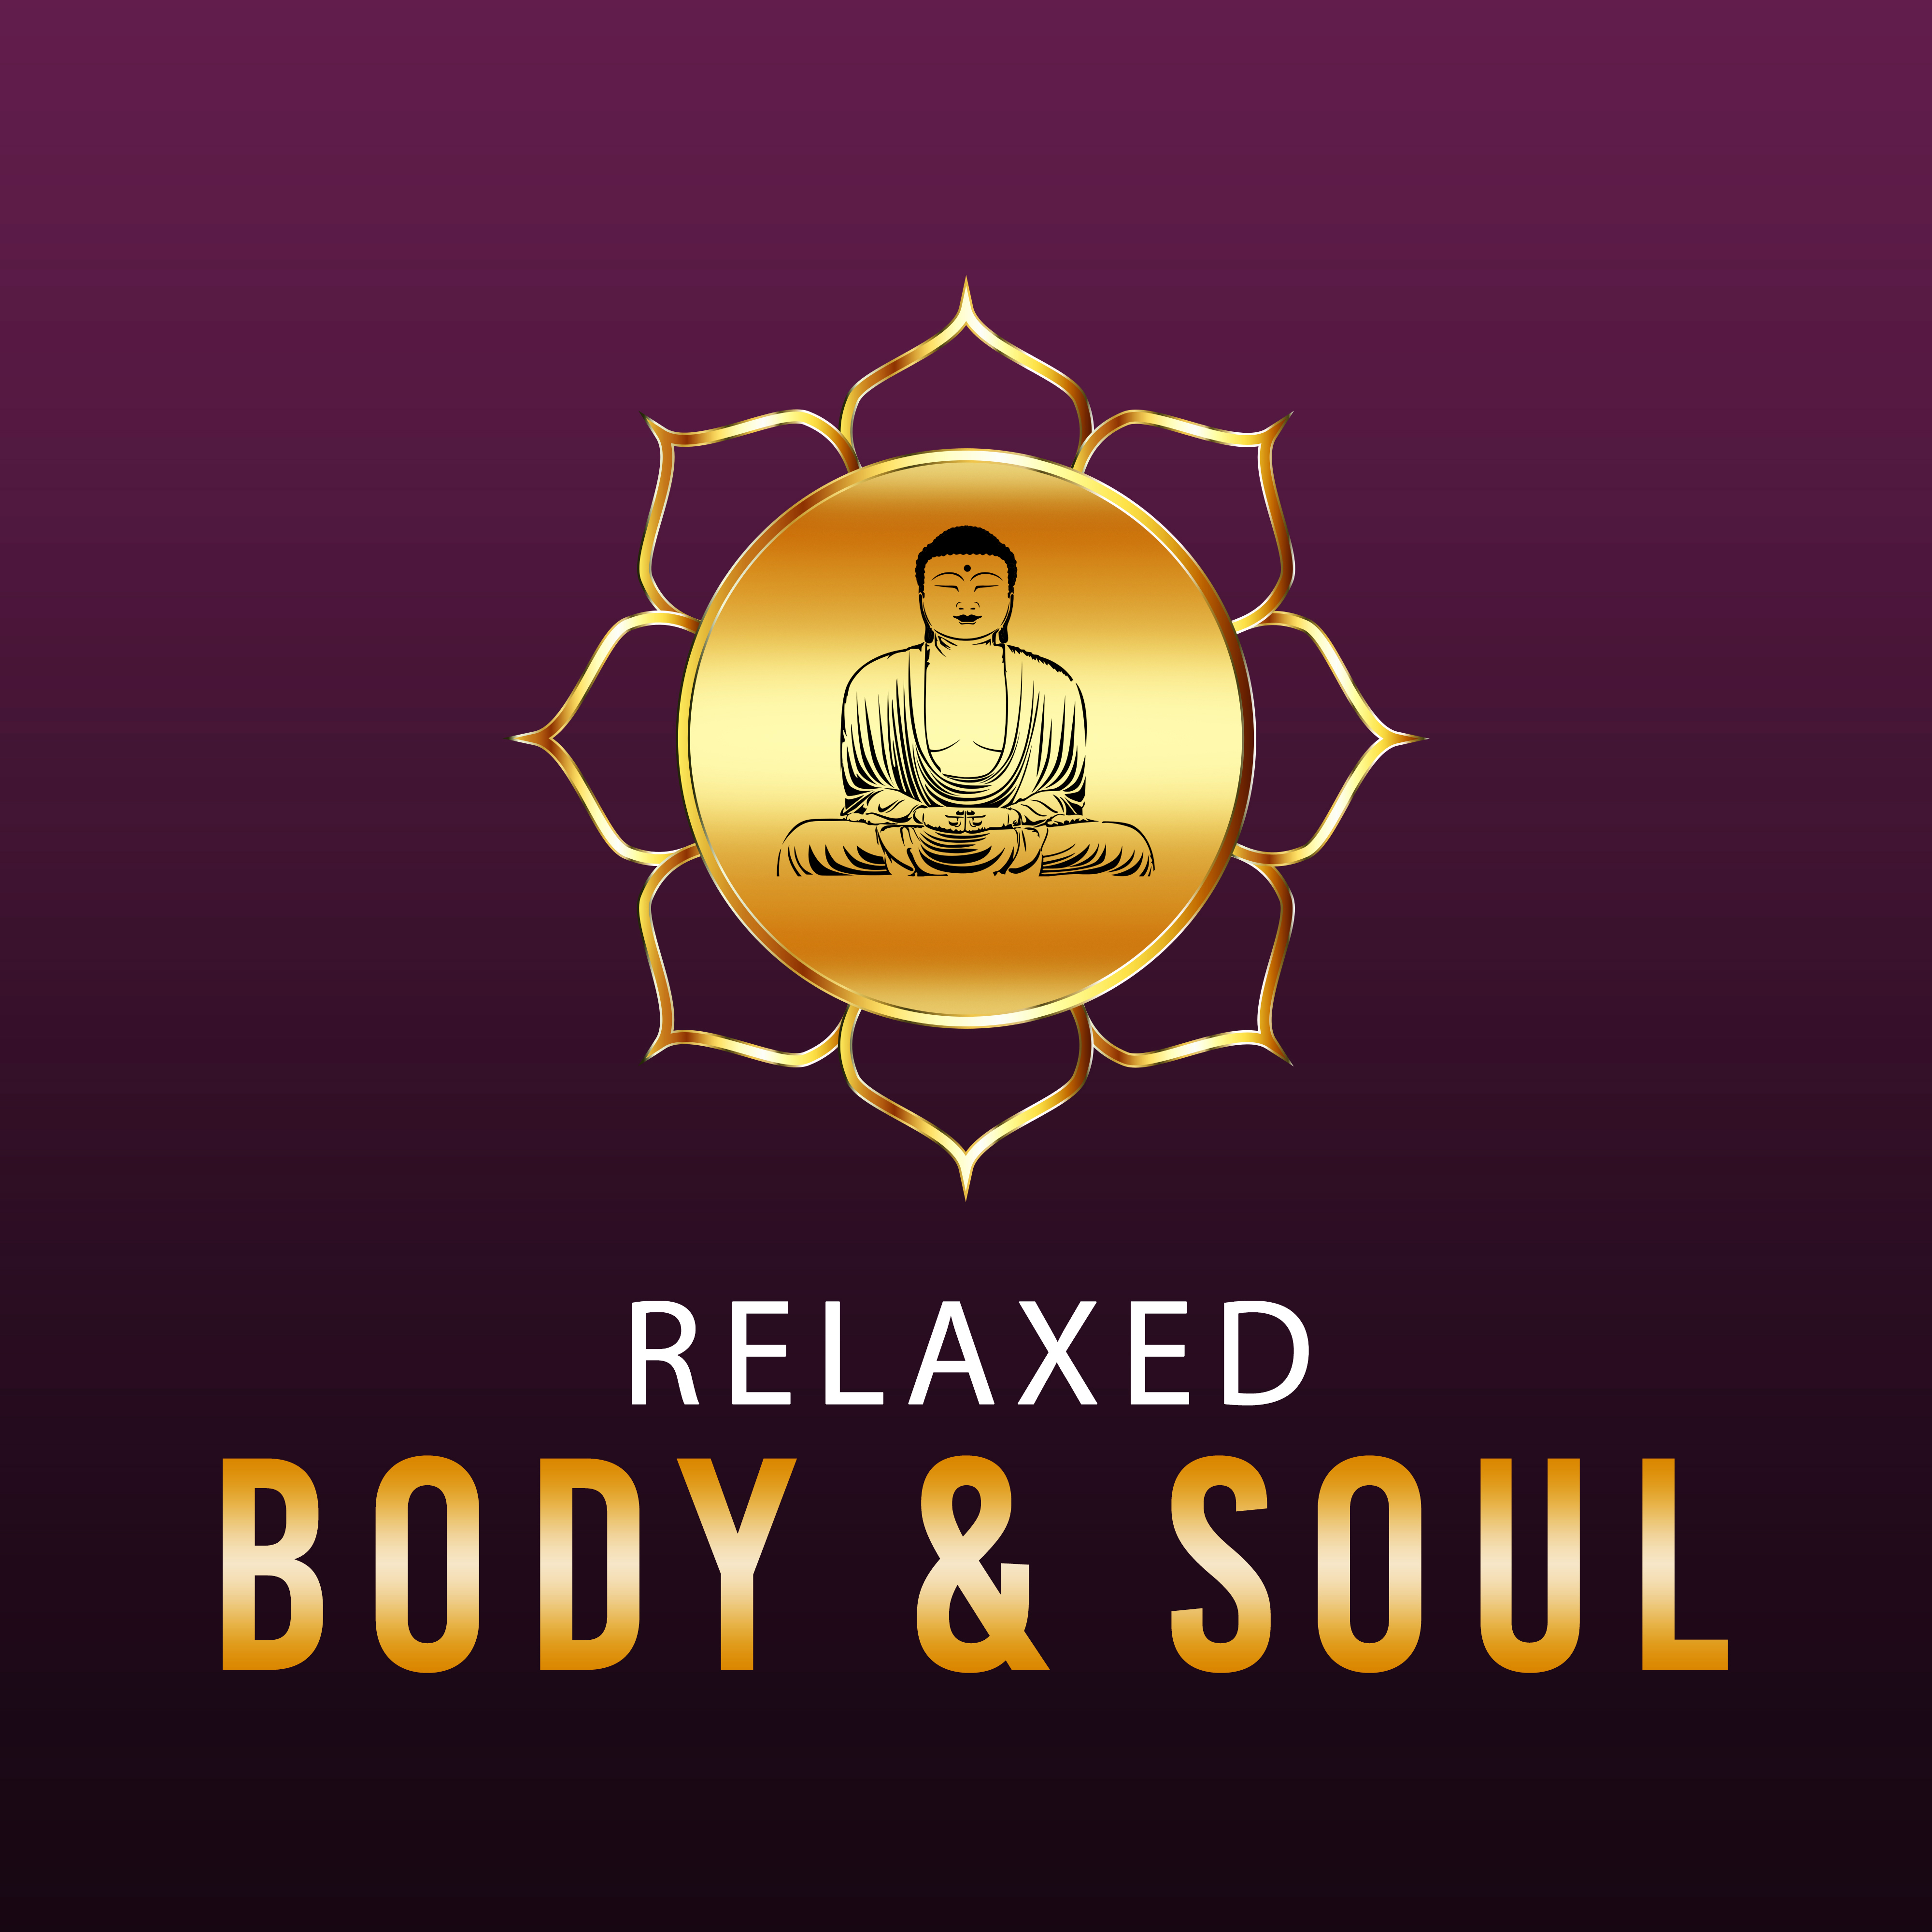 Relaxed Body & Soul – Finest Selected Nature Songs, Relaxing Music, Calmness, Rest, Yoga Music